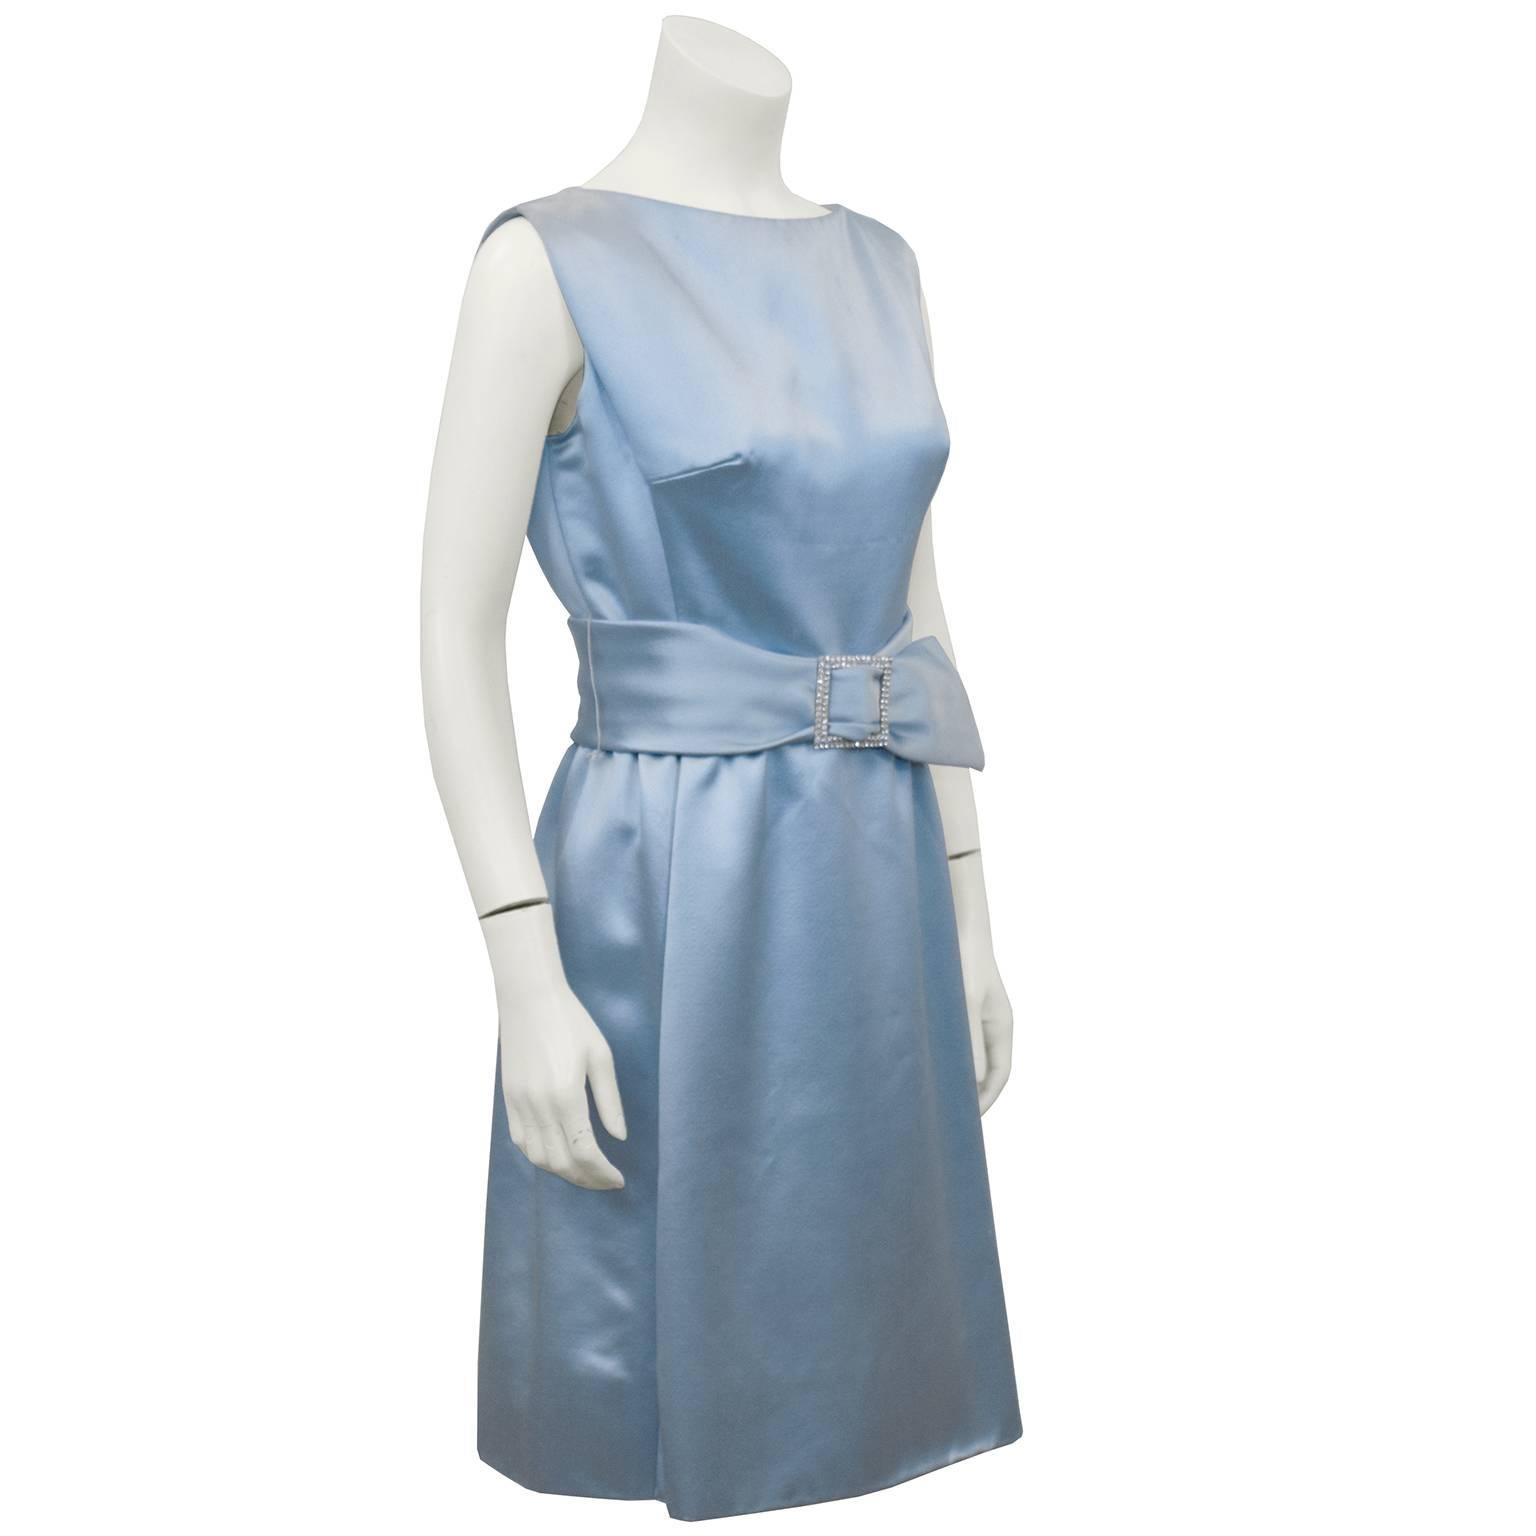 Adorable baby blue silk satin cocktail dress by Suzy Perette, dating from the 1960's. Beautiful boat neckline and matching blue satin wide belt with rhinestone encrusted buckle. Very Cinderella. Excellent vintage condition. Fits like a US size 6.